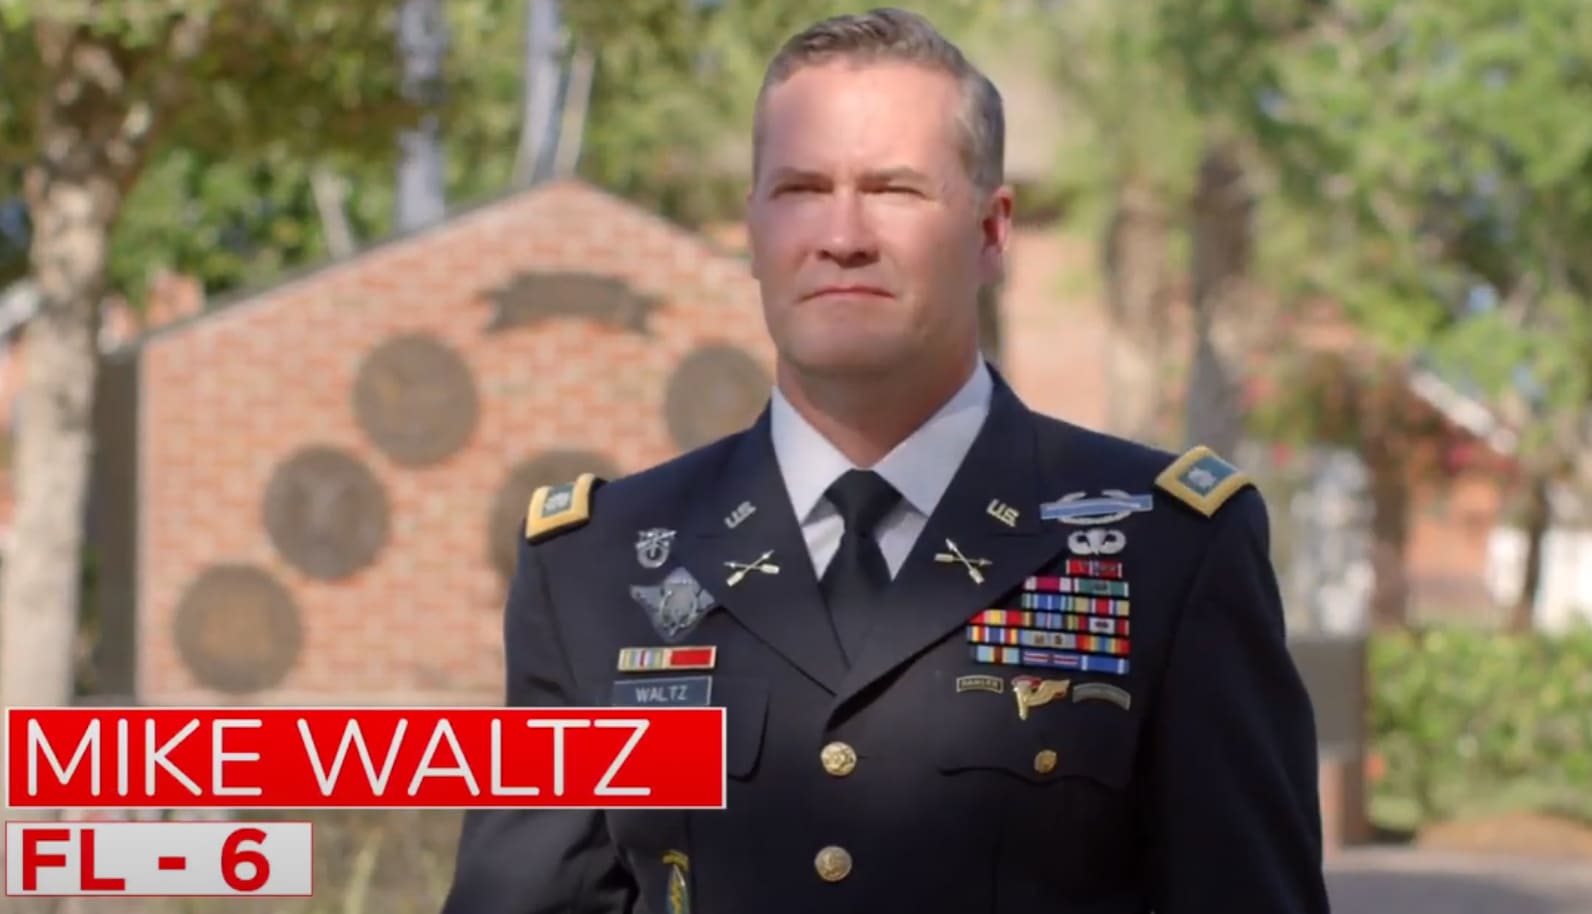 Michael Waltz seeks backup for 'Florida Warriors' in new ad